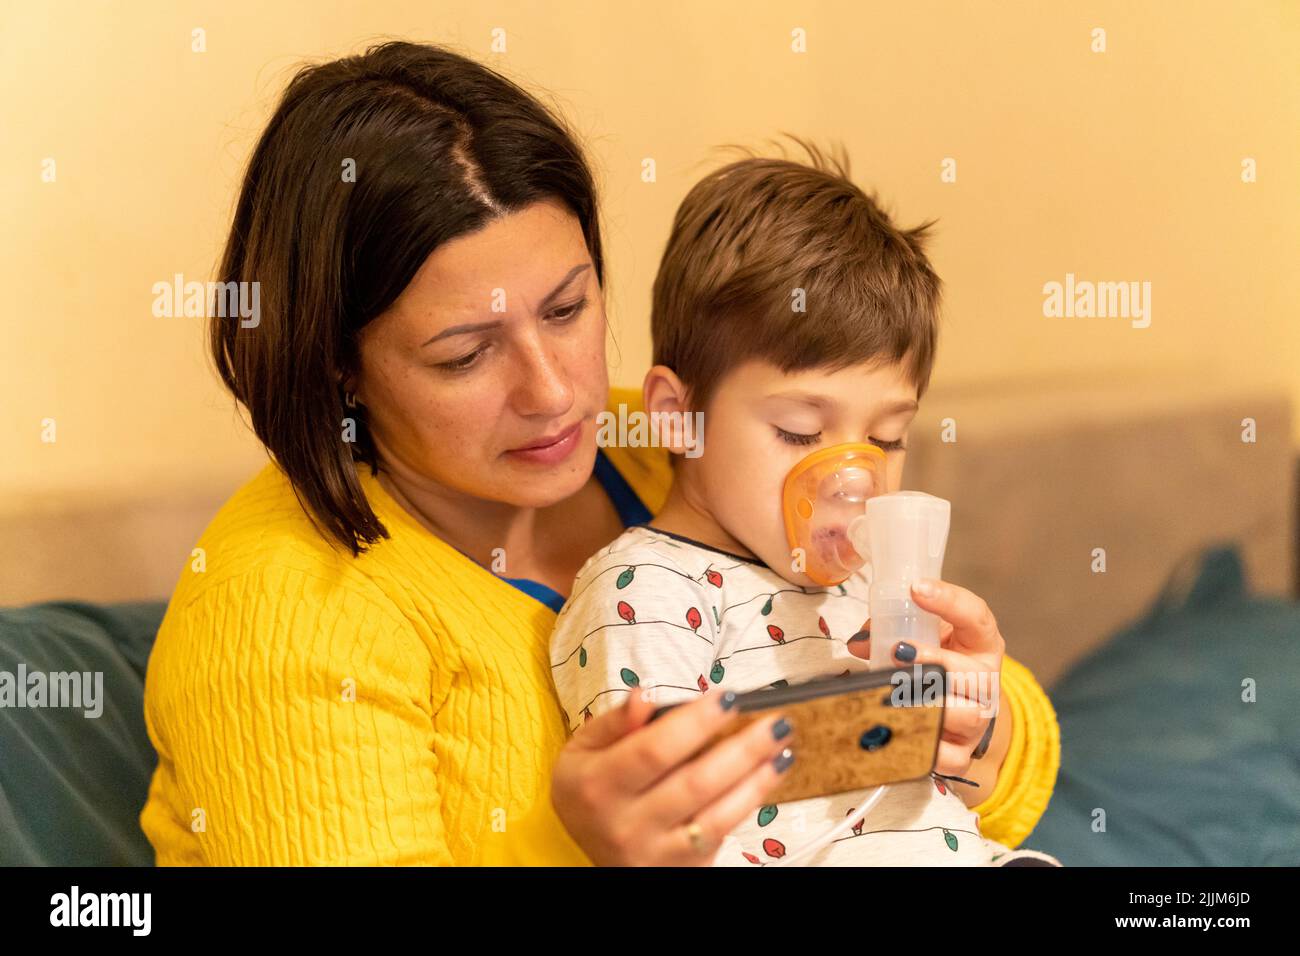 A closeup of a woman giving a child inhalation while he is watching something on a smartphone. Stock Photo